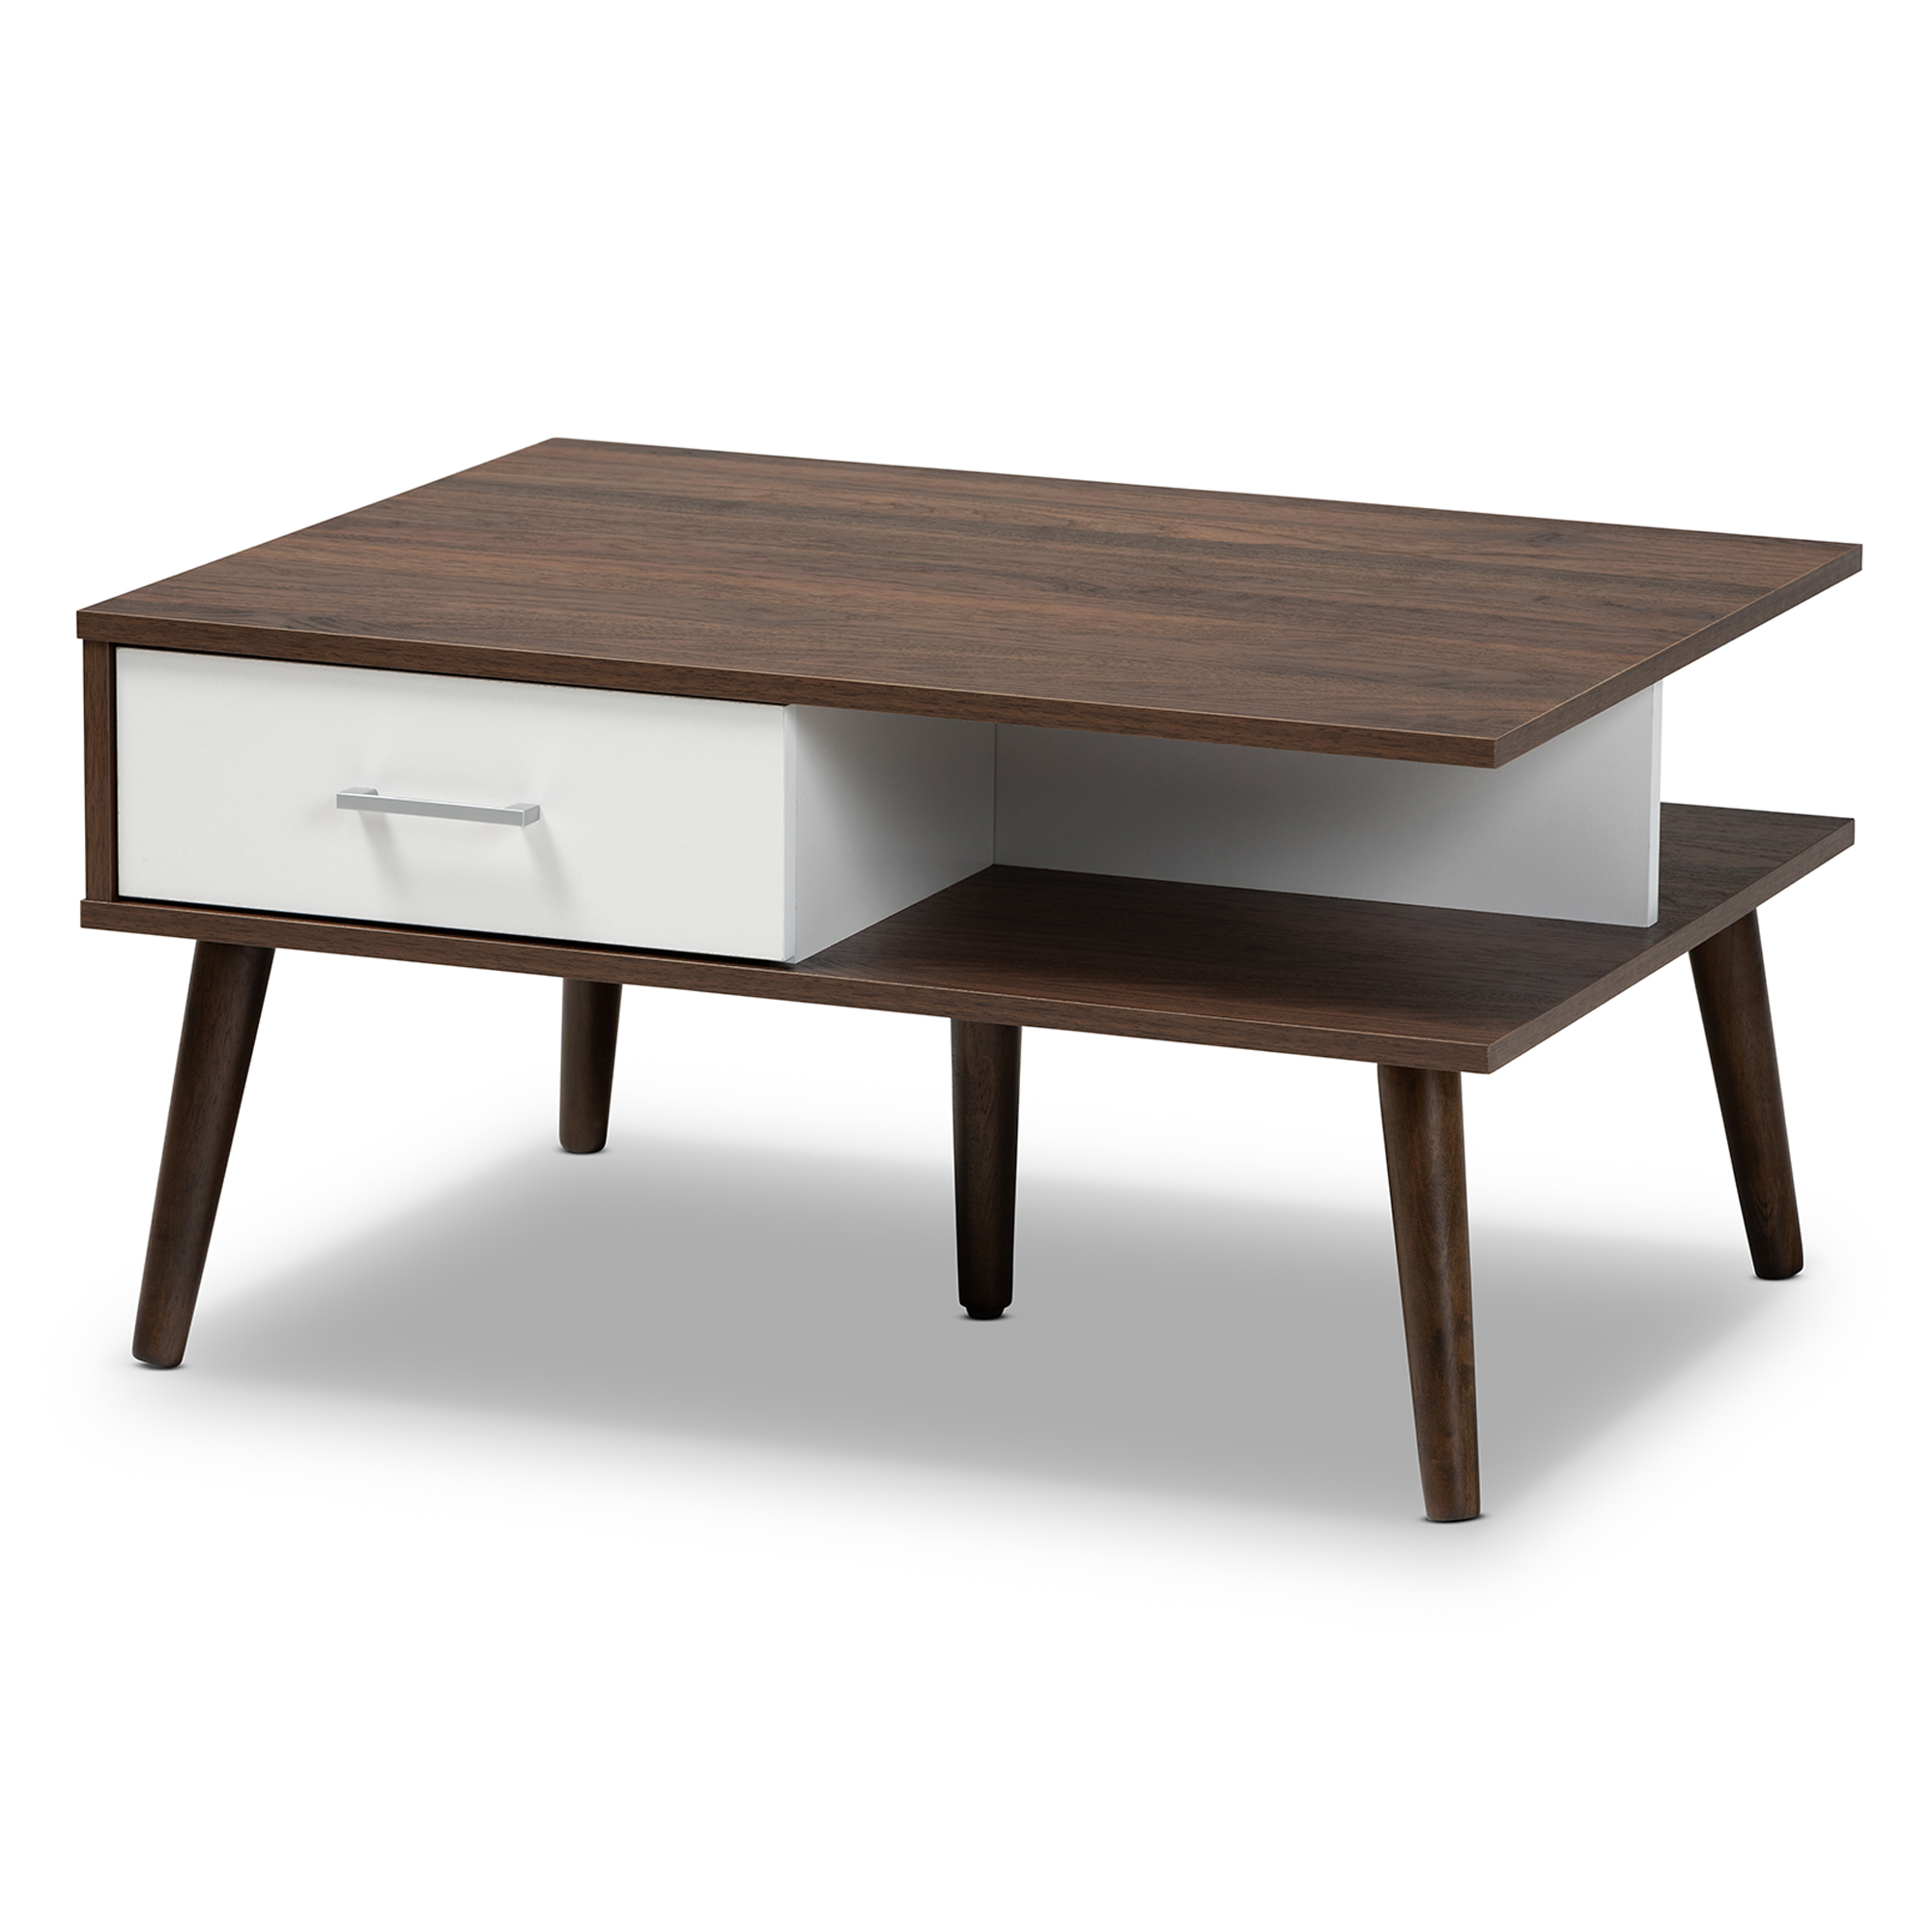 Baxton Studio Merlin Mid Century Modern Two Tone Walnut And White Finished 2 Drawer Wood Coffee